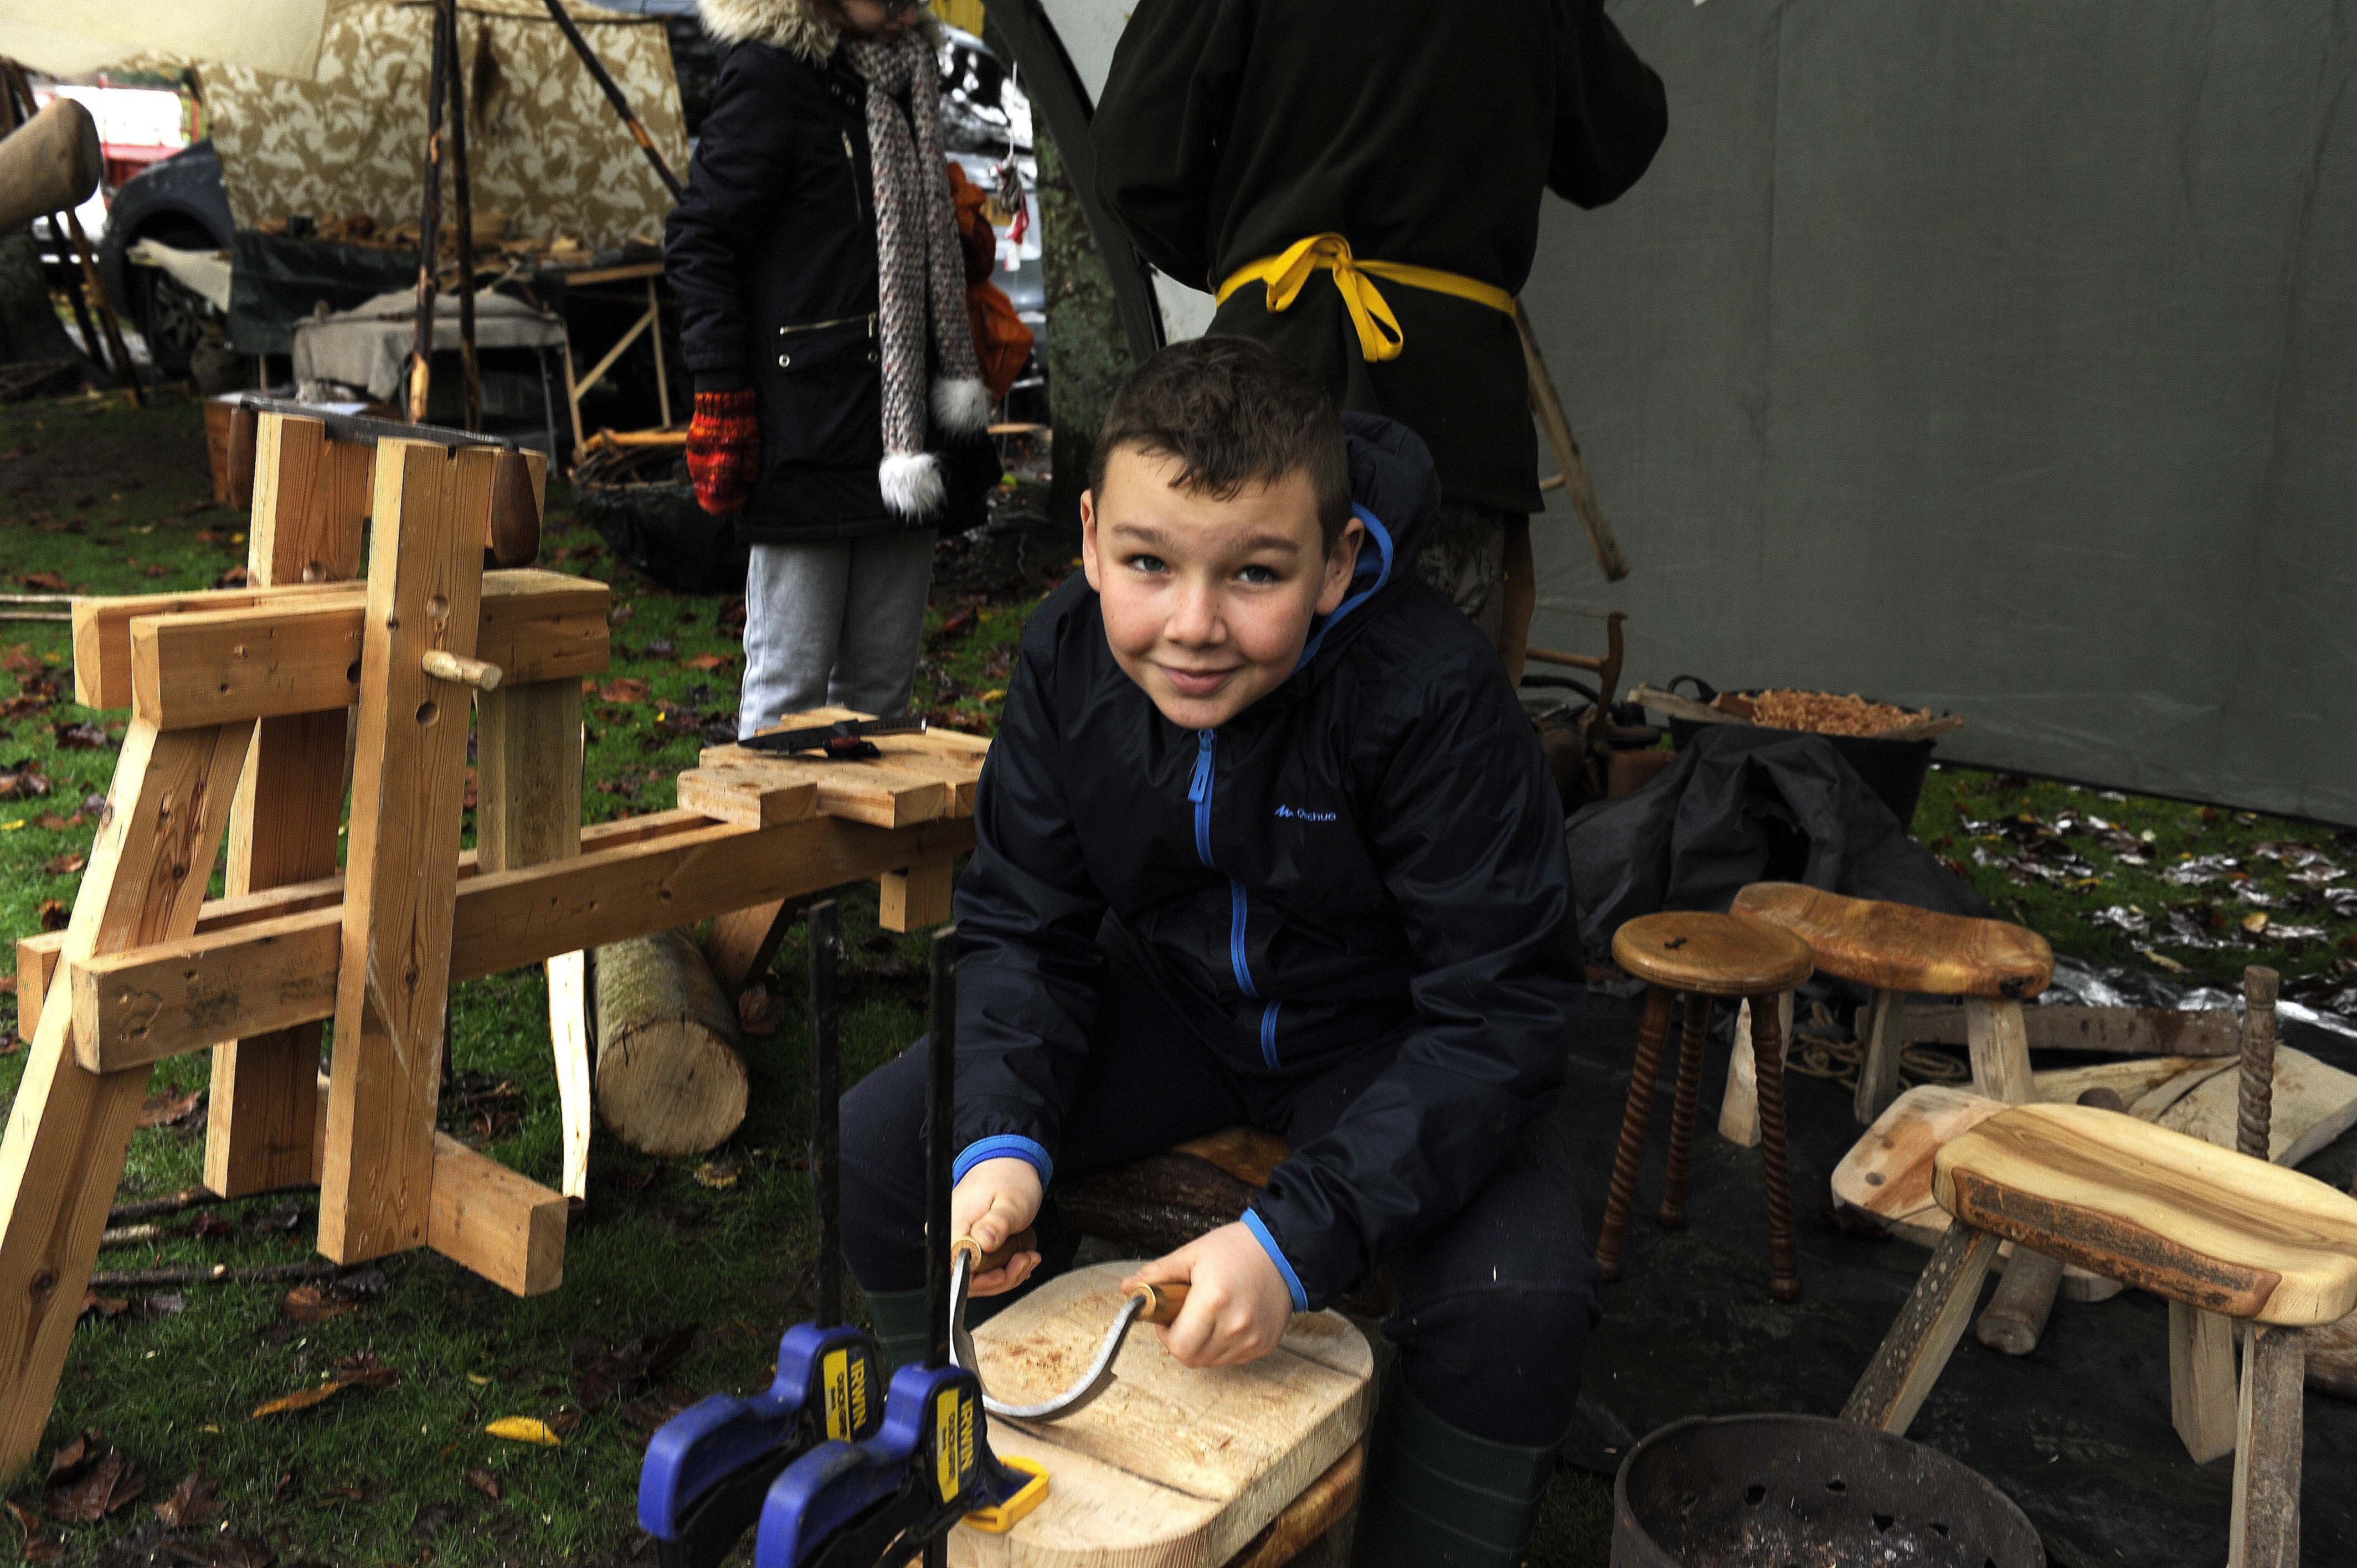 11 year old Lachlan Slebbin from Dunbar  at the Tweed Valley Forest Festival in Peebles.